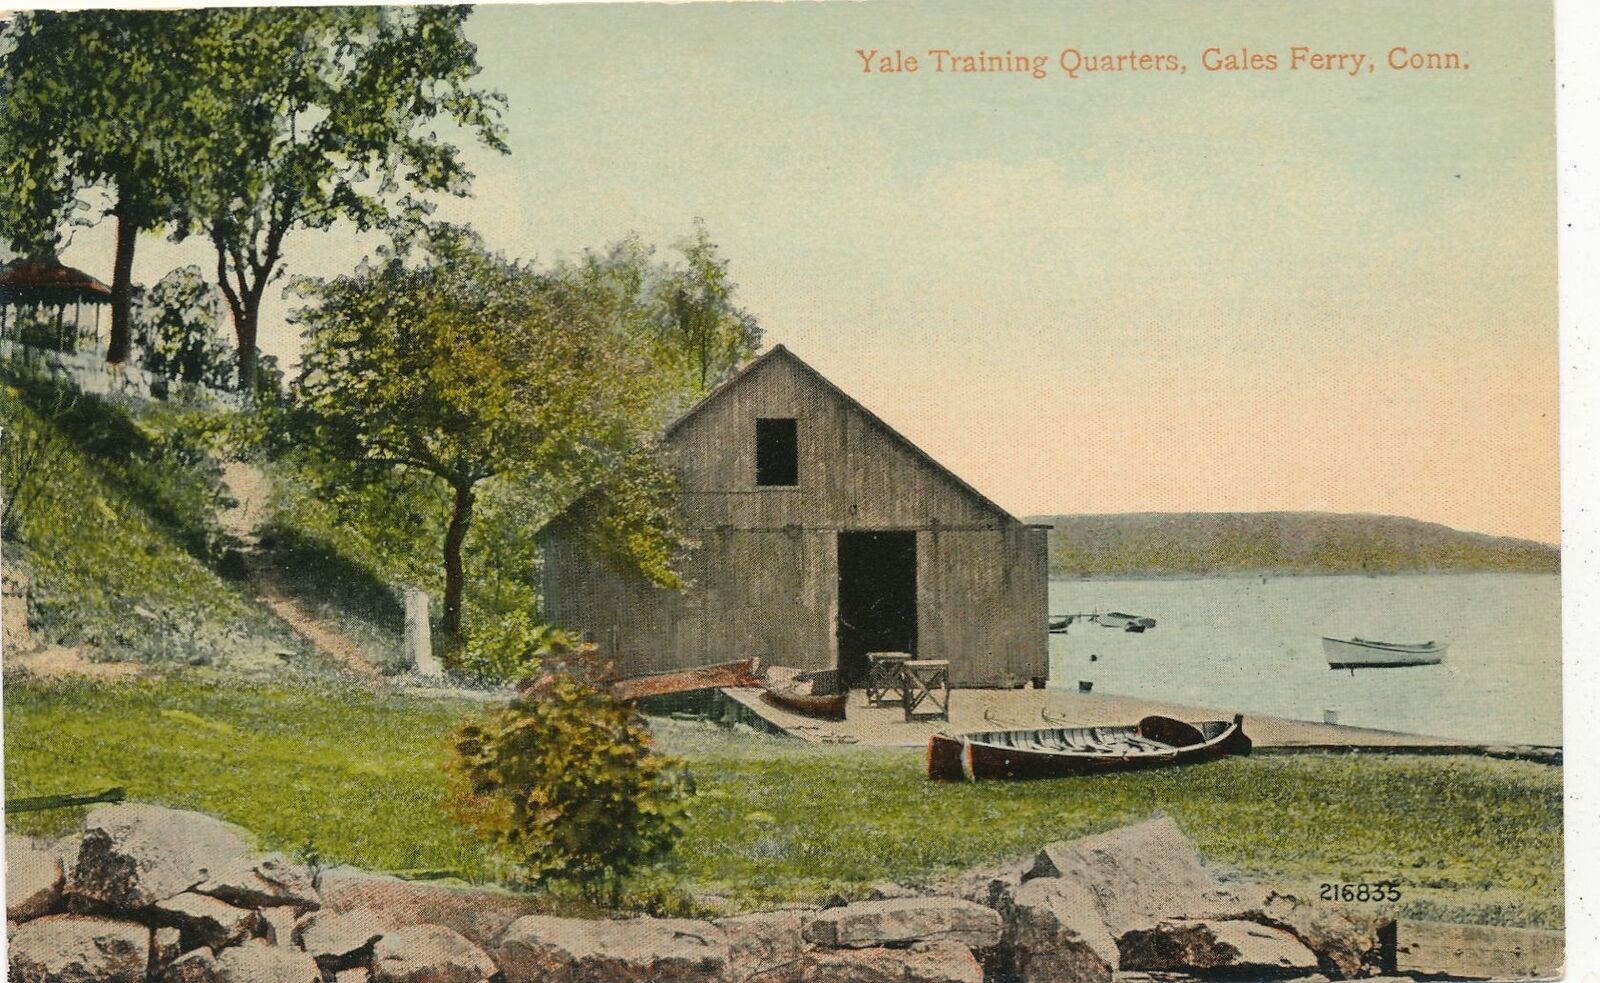 GALES FERRY CT - Yale Training Quarters Postcard